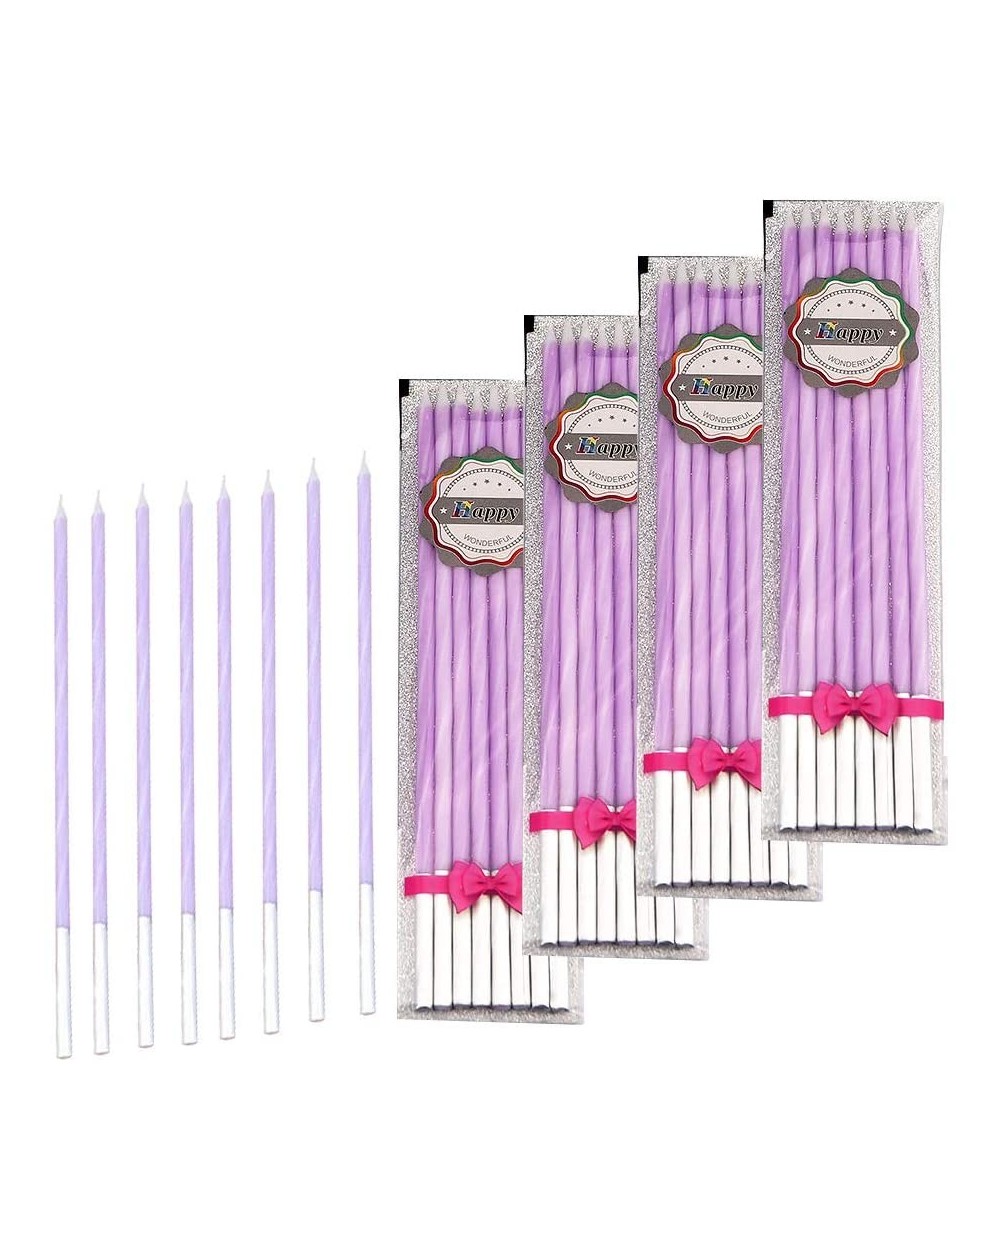 Birthday Candles 32 Count Birthday Candles Long Thin Cake Candles Metallic Birthday Candles in Holders for Party Wedding Birt...